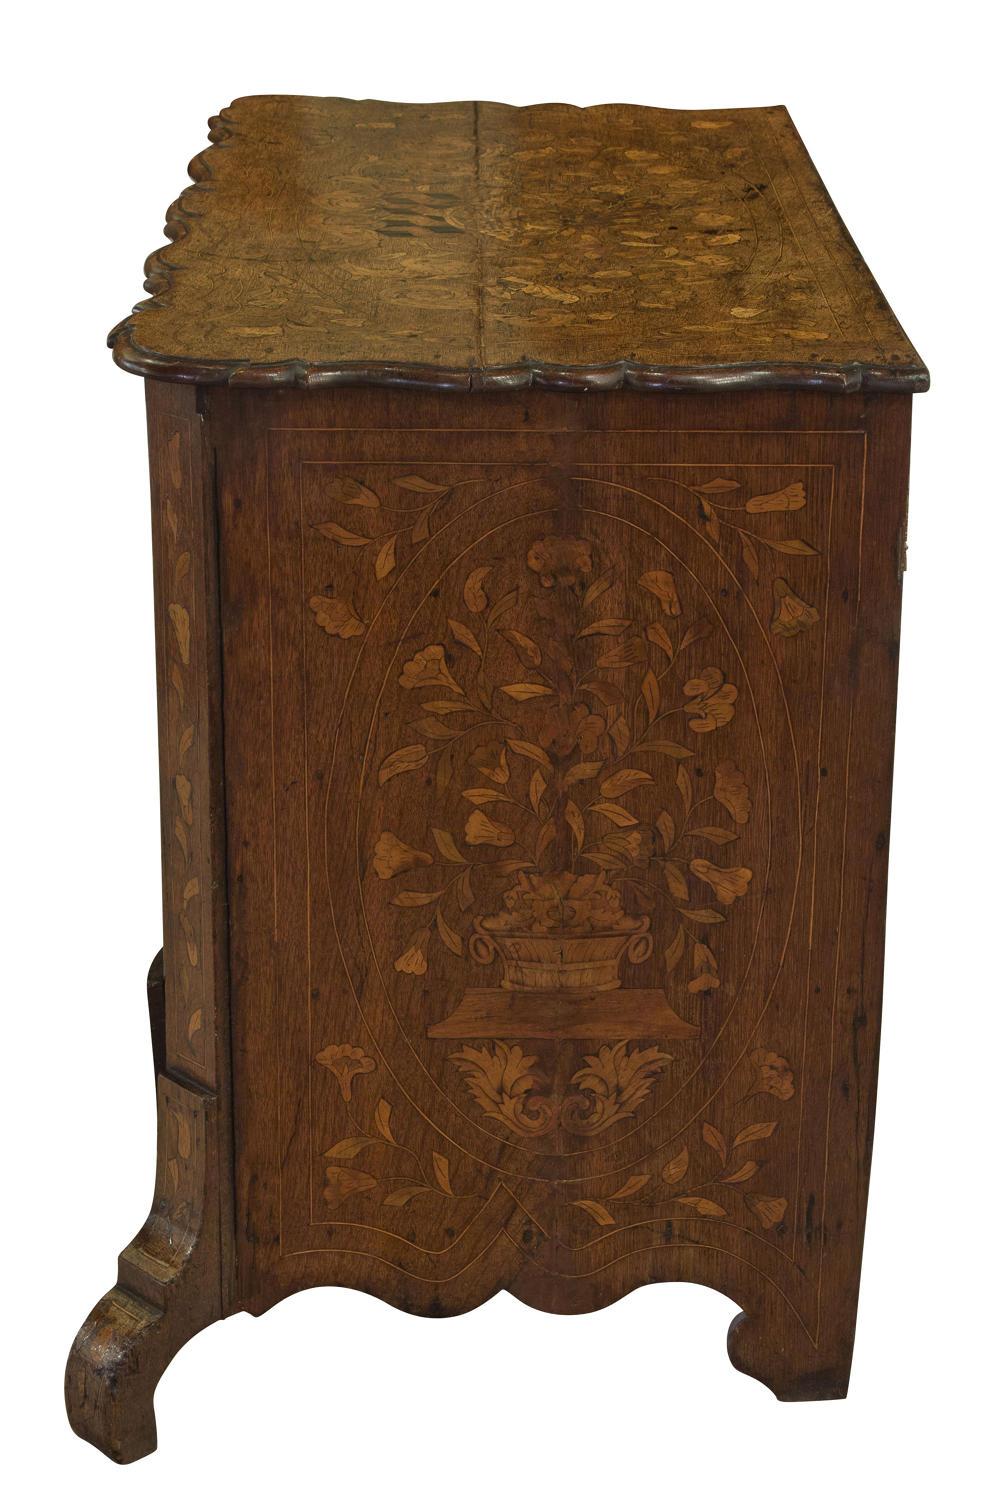 Dutch bombe chest of drawers with inlaid foliate and avian motifs in marquetry design

18th century.

